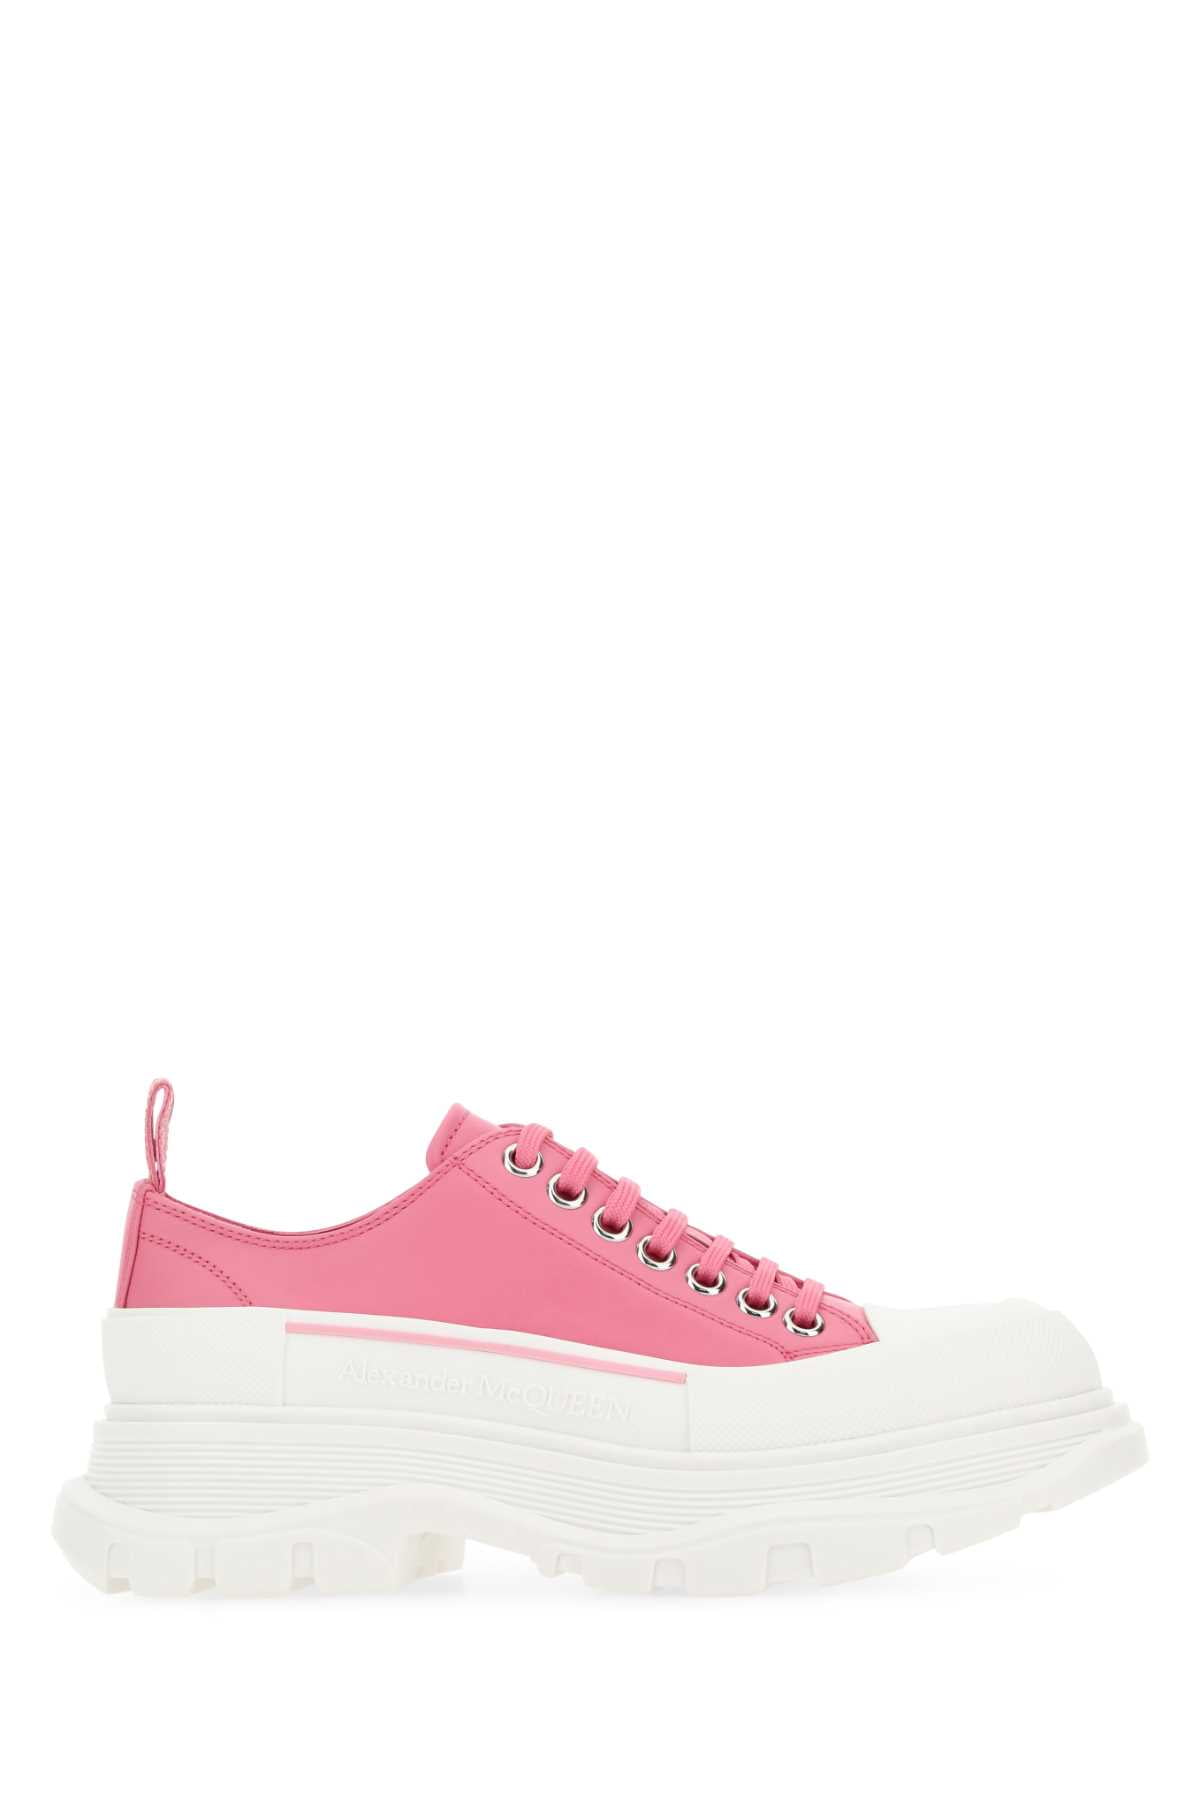 Alexander McQUEEN Pink Dip-Dyed 'Oversized' Sneakers | INC STYLE